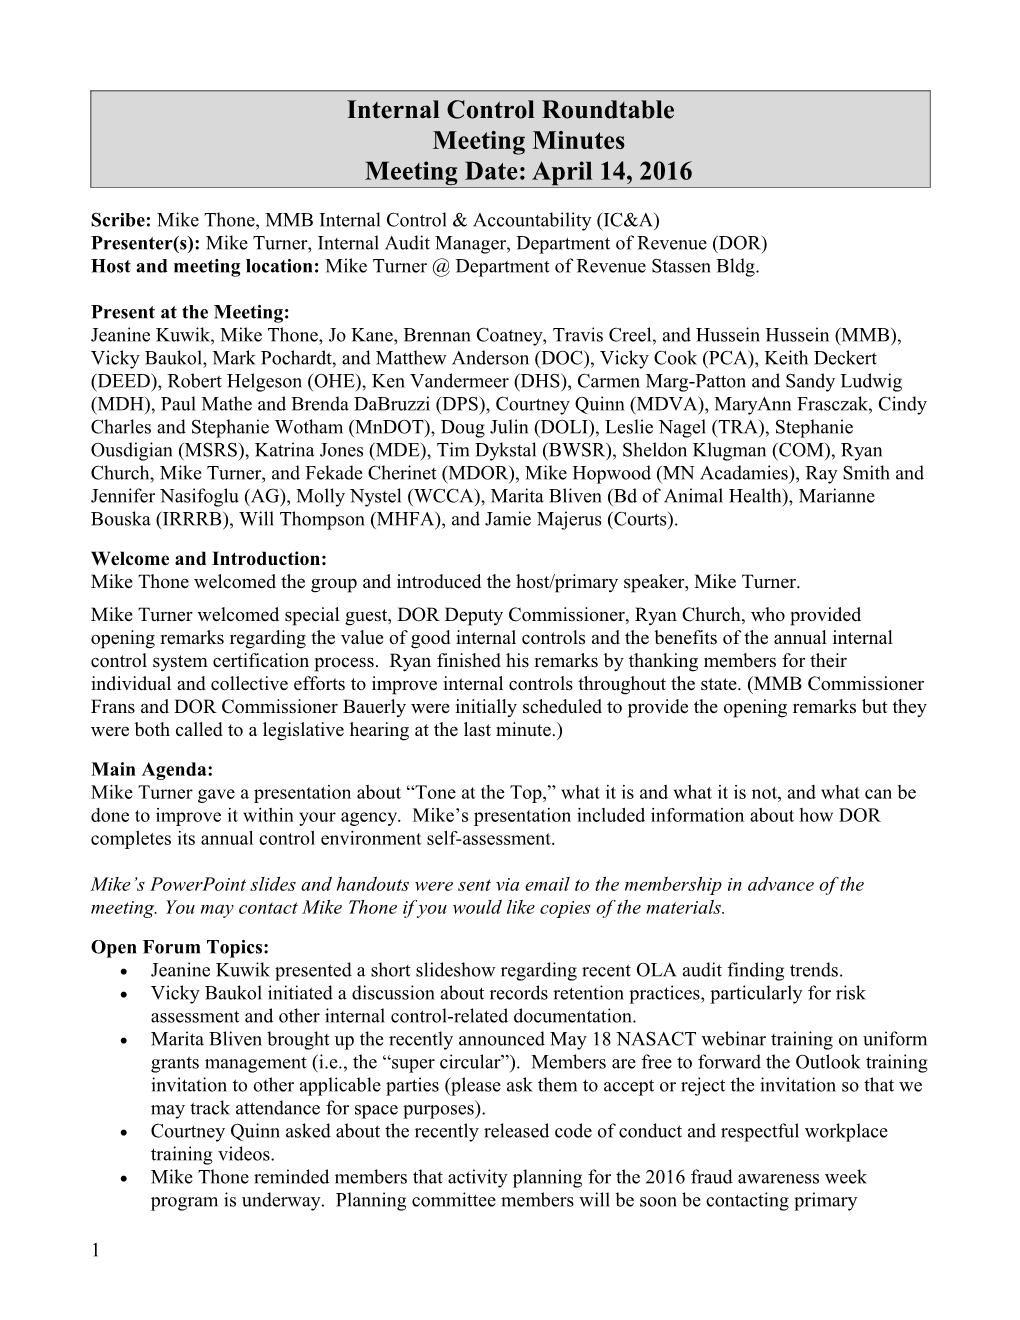 April 14, 2016 Internal Control Roundtable Meeting Minutes